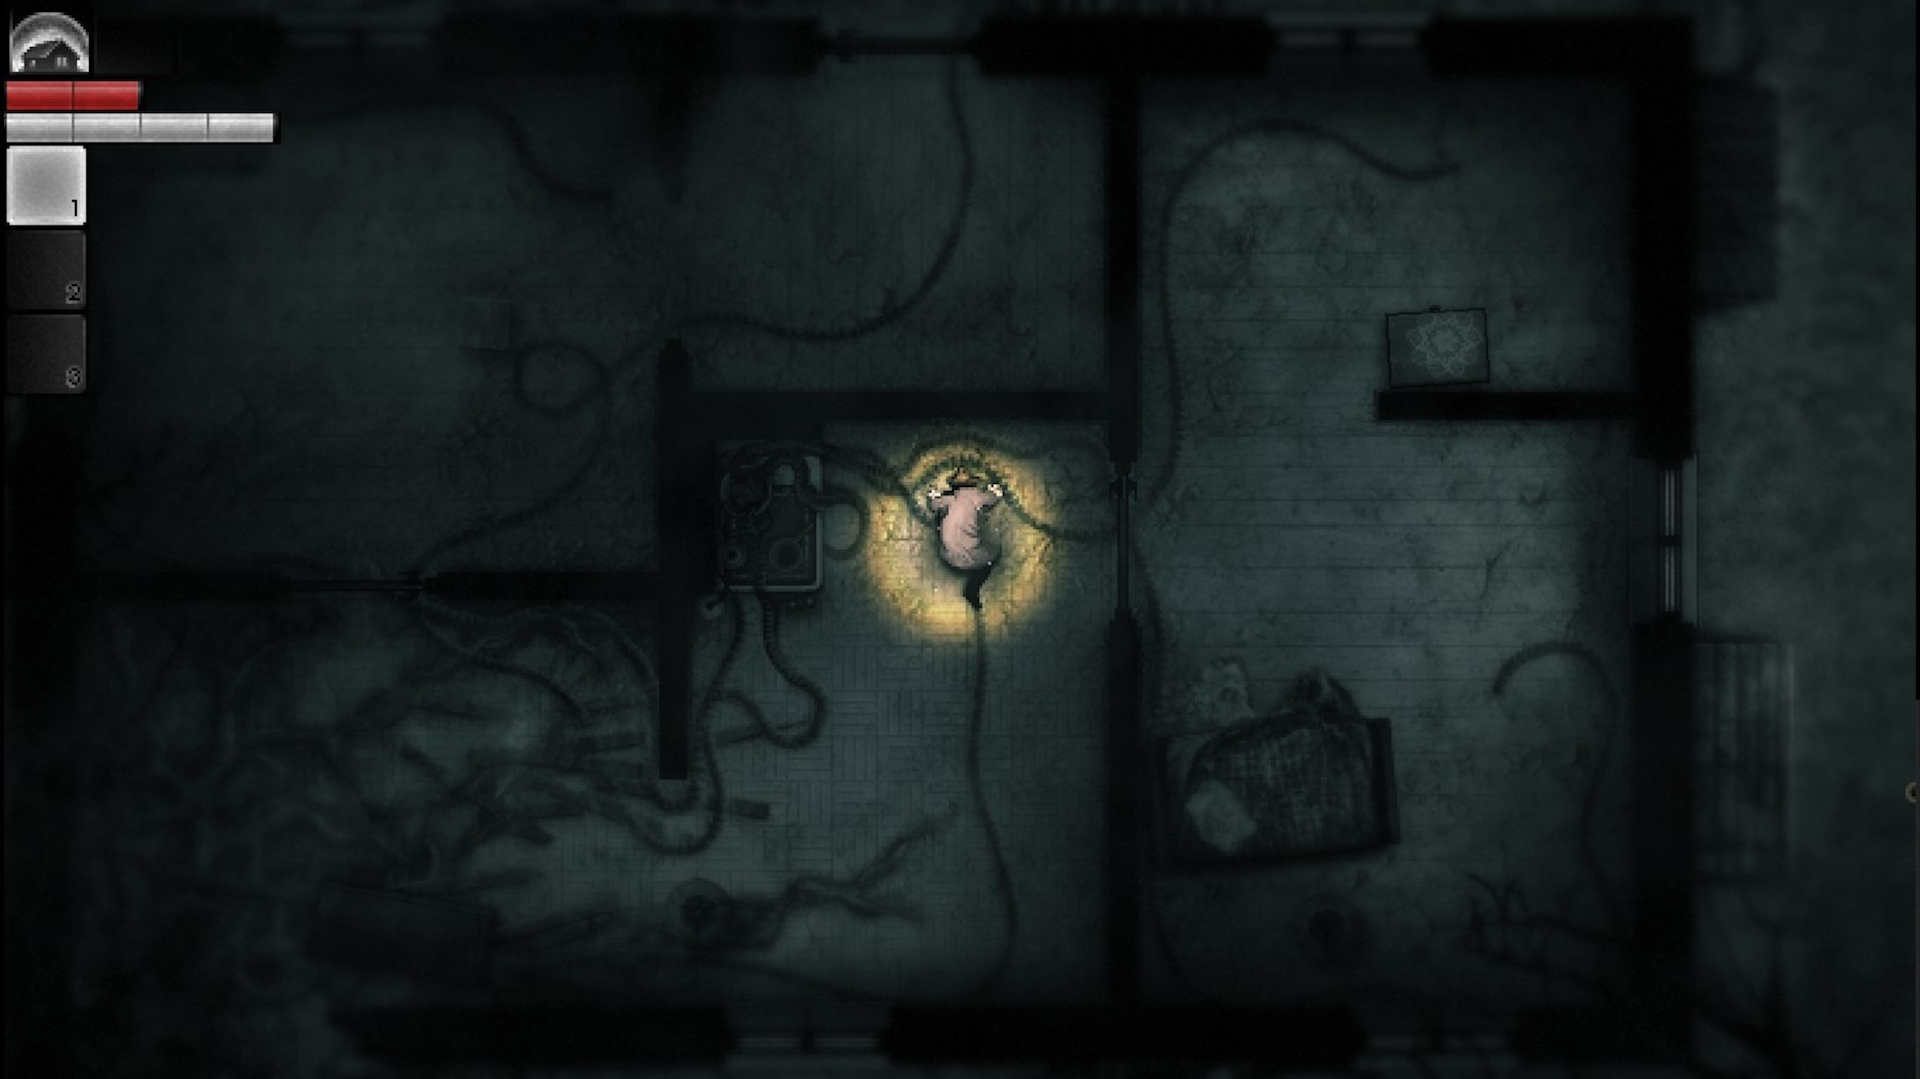 In retrospect: I got lost in Darkwood, but now I live there. I ...